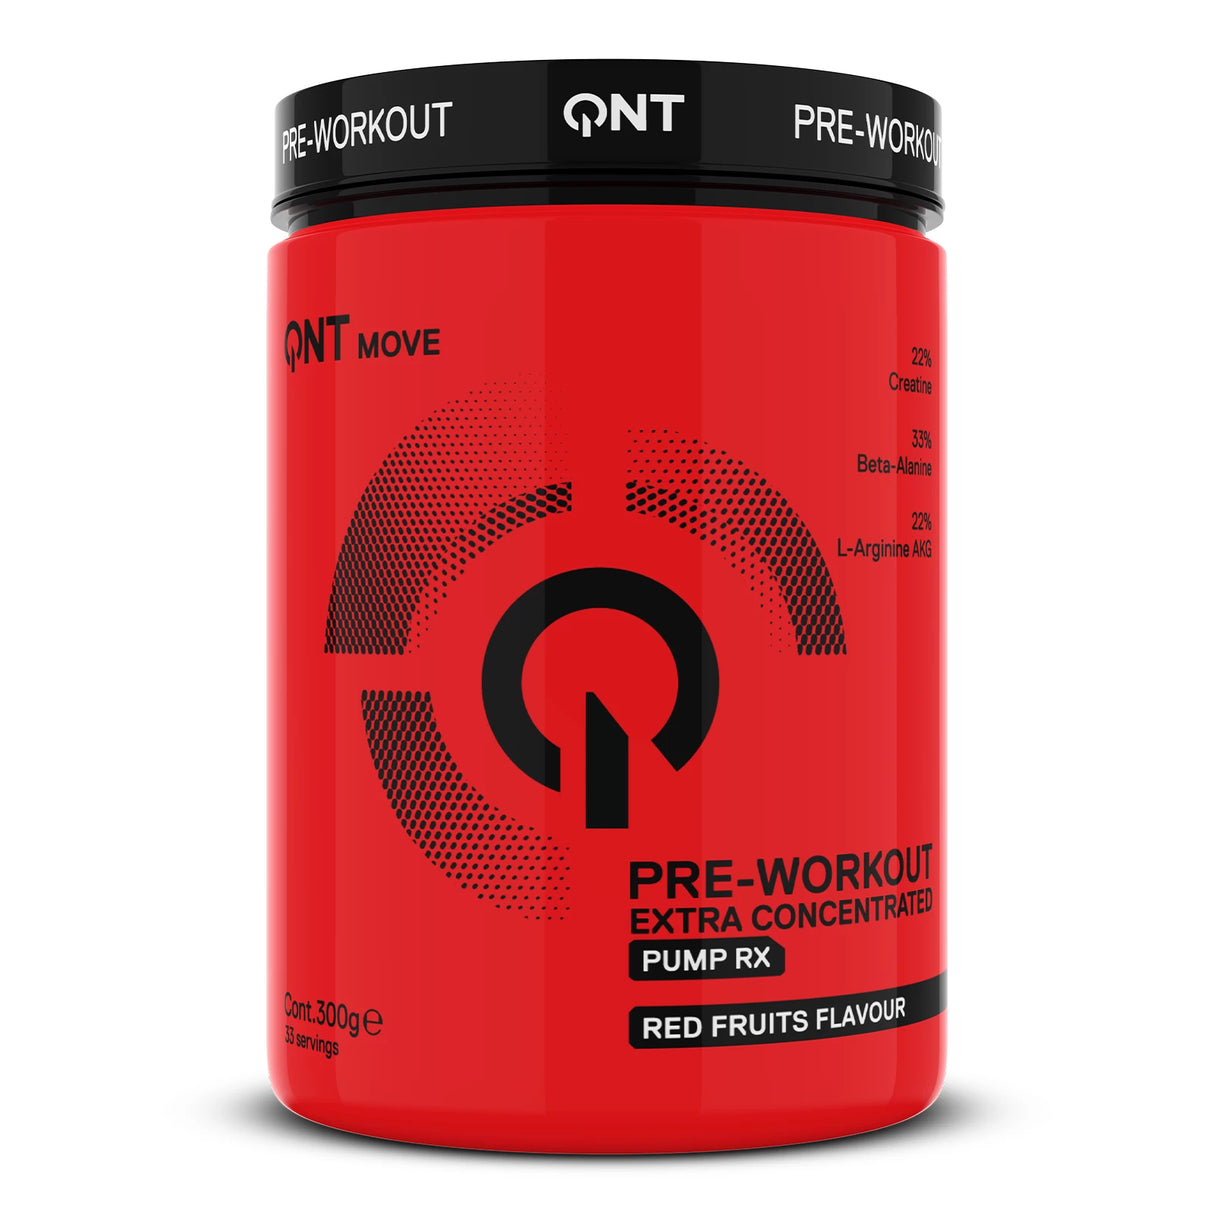 PRE-WORKOUT EXTRA CONCENTRATED - 300G QNT